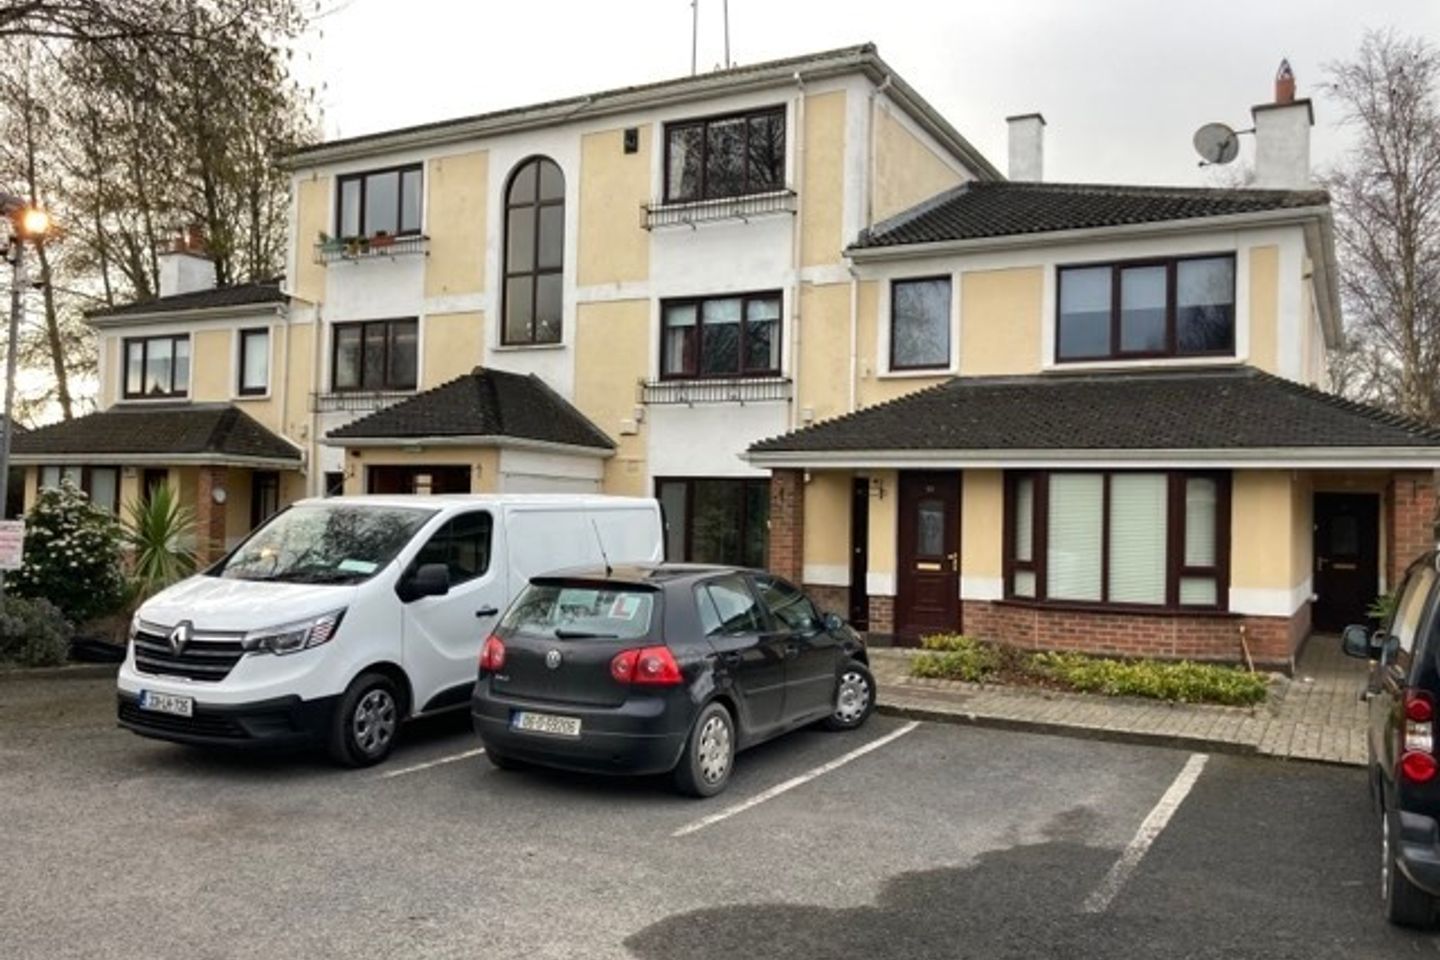 Apartment 47, Turvey Woods, Donabate, Co. Dublin